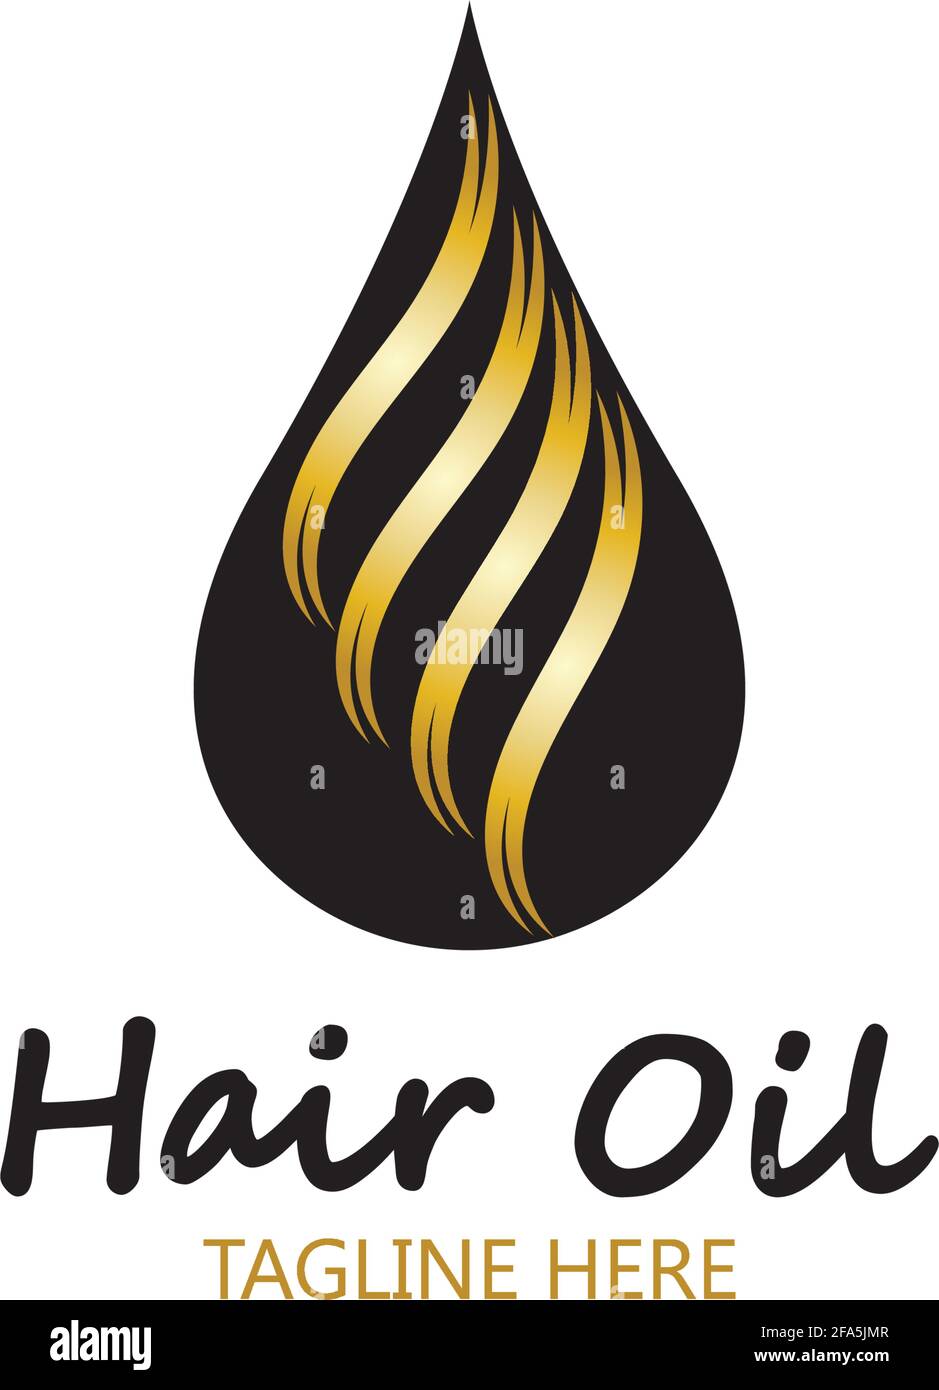 Hair Oil Logo Vector Images over 1100